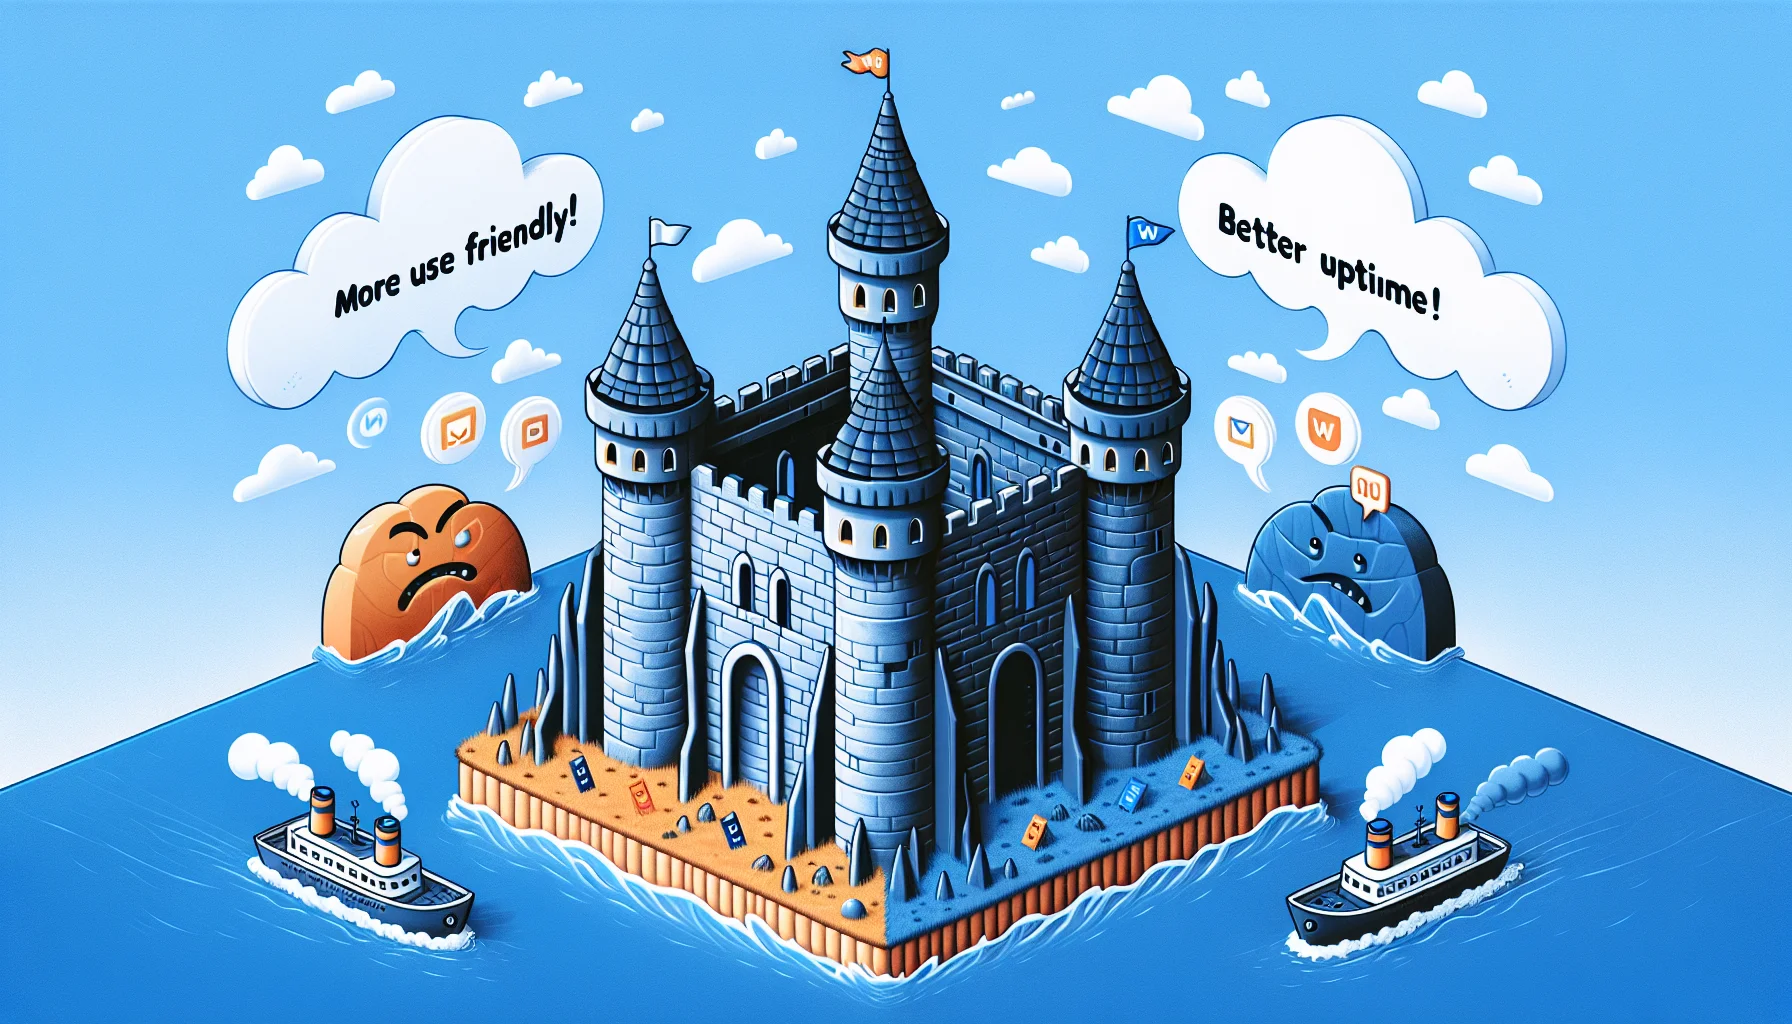 Create a humorous illustration that depicts the competition between two abstract web hosting entities. For one side, symbolize it with a sleek, intricate castle fortress, representing advanced and sophisticated features, as a metaphor for Wix. On the other side, visualize another entity as a secure, fortified ship floating on a digital sea indicating constant support and stability, representing Bluehost. Let these entities interact with playful animated speech bubbles, with phrases like 'More user friendly!', 'Better uptime!', to emphasize the ongoing friendly rivalry of web hosting superiority.